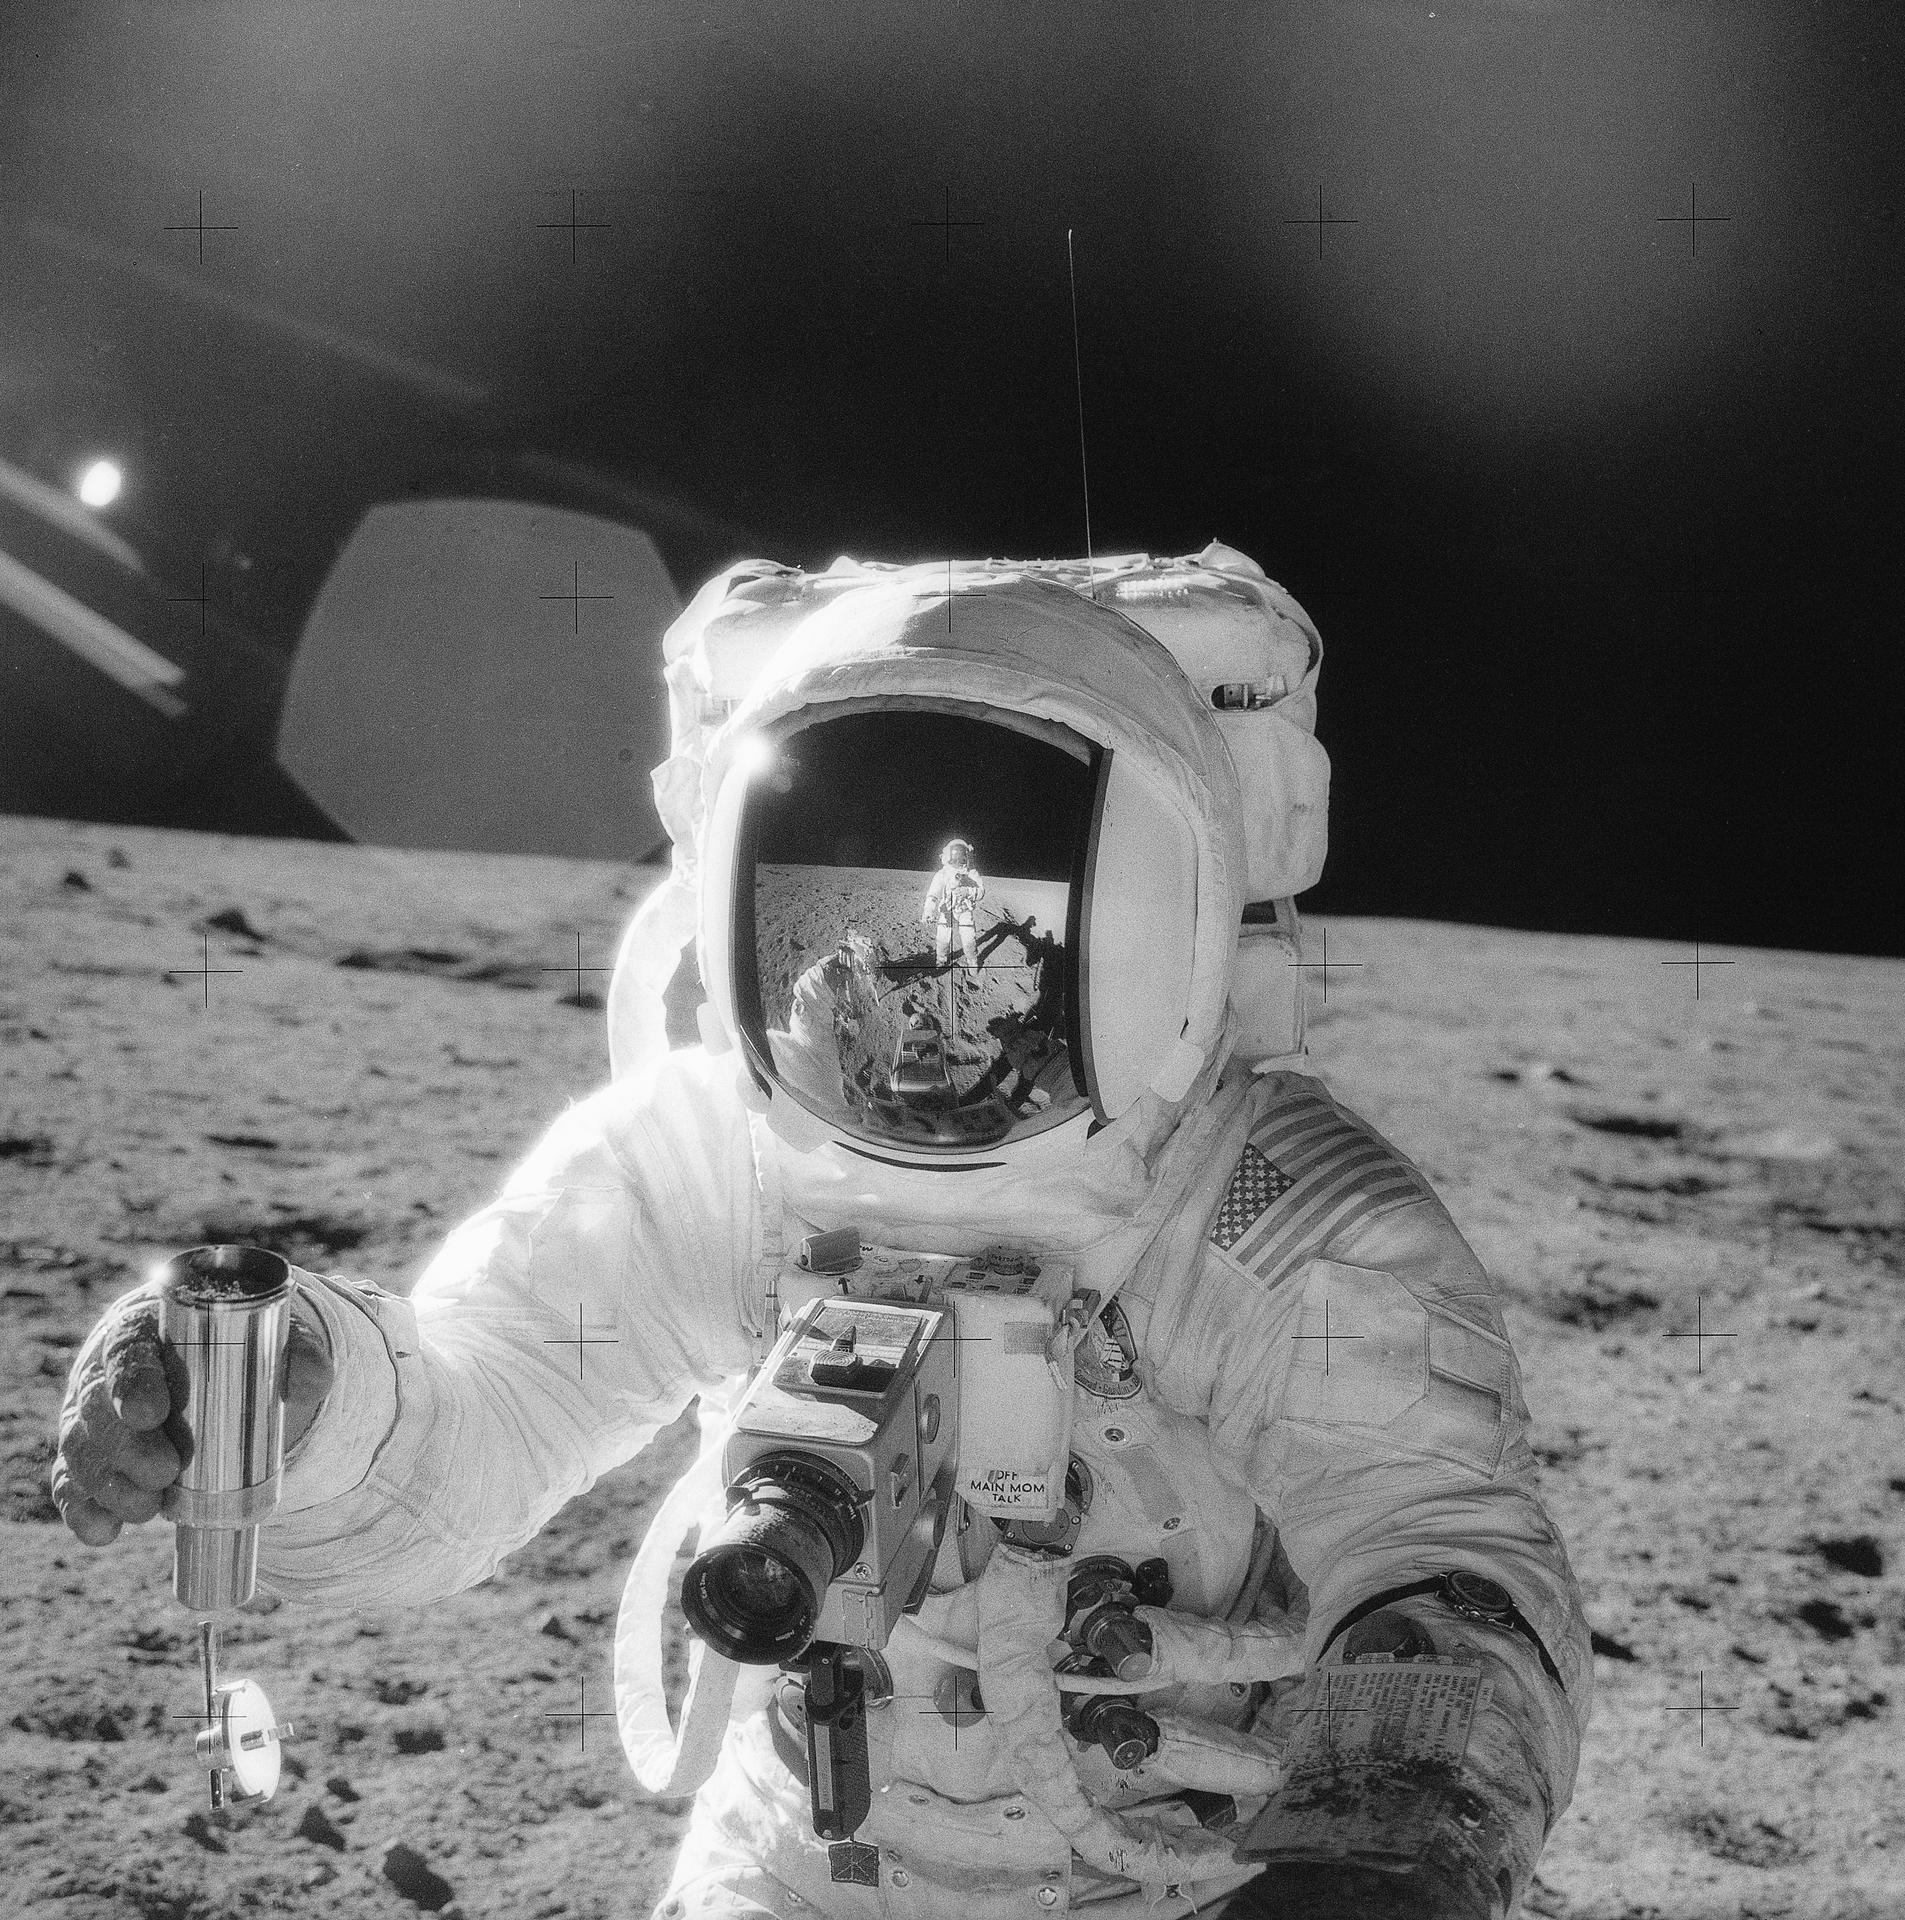 One of the Apollo 12 astronauts on the Moon’s surface is holding a container of lunar soil, the other is reflected in helmet. 